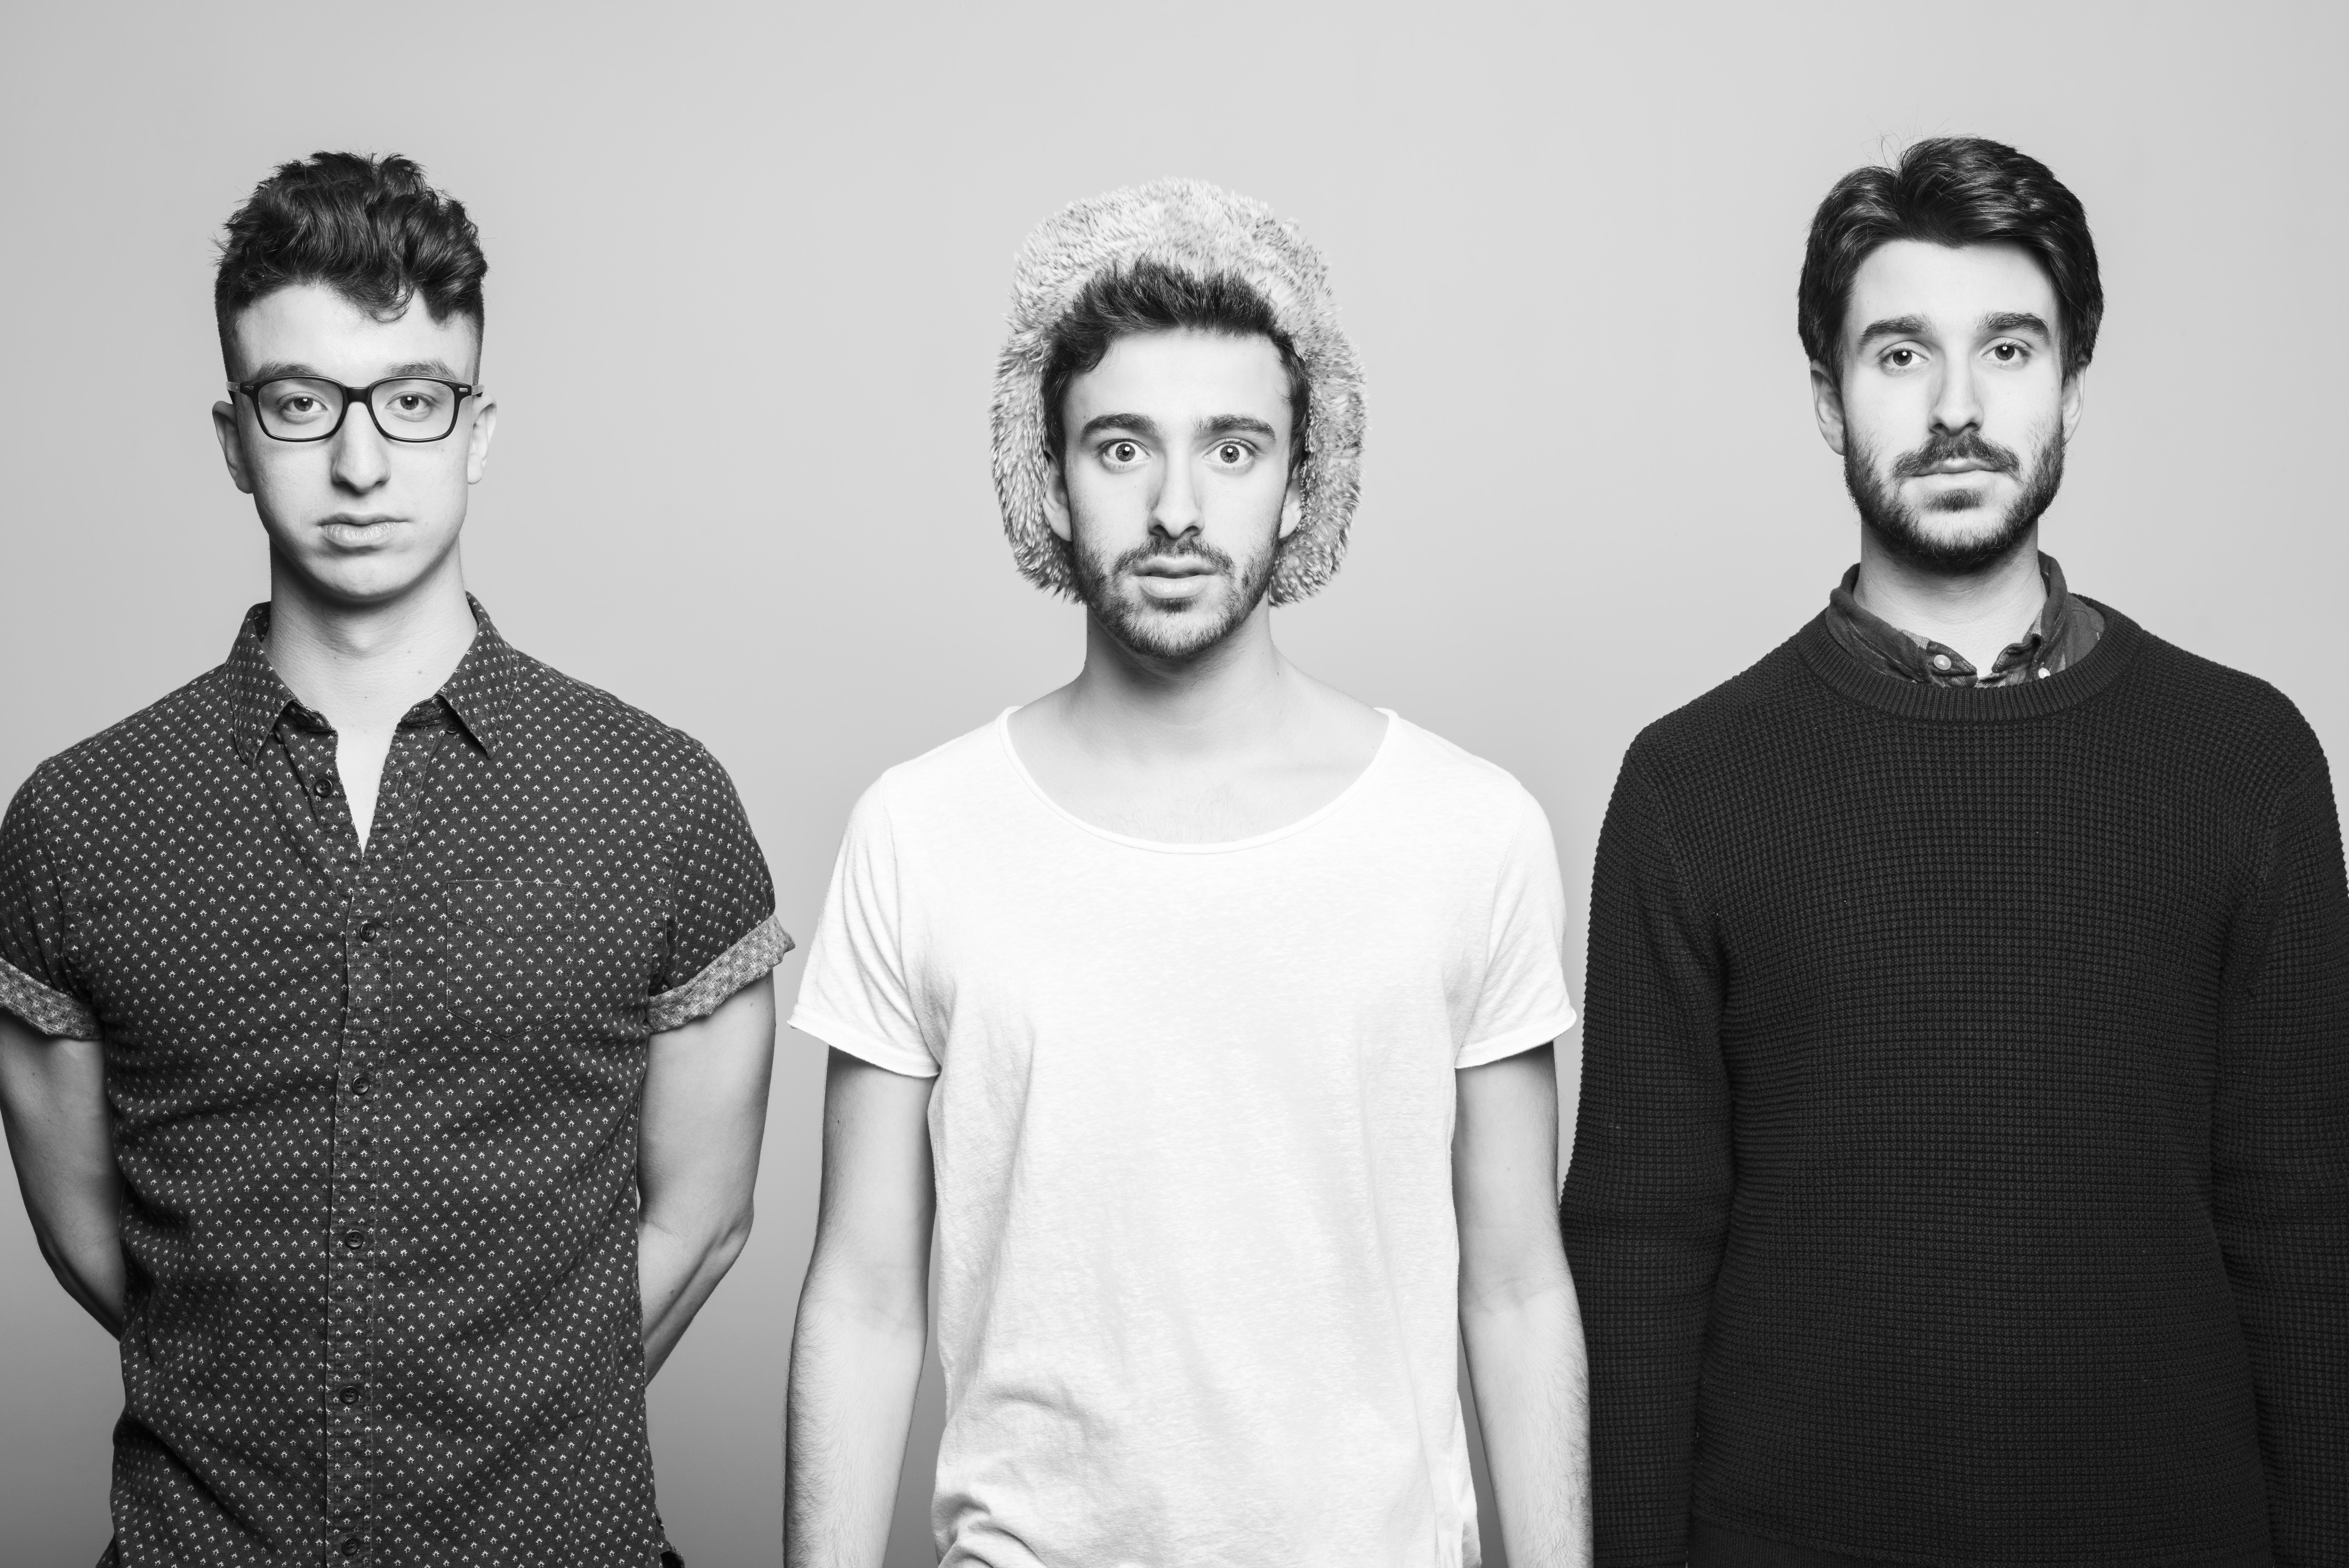 Indiepop band AJR looks forward to ACL performance The Baylor Lariat